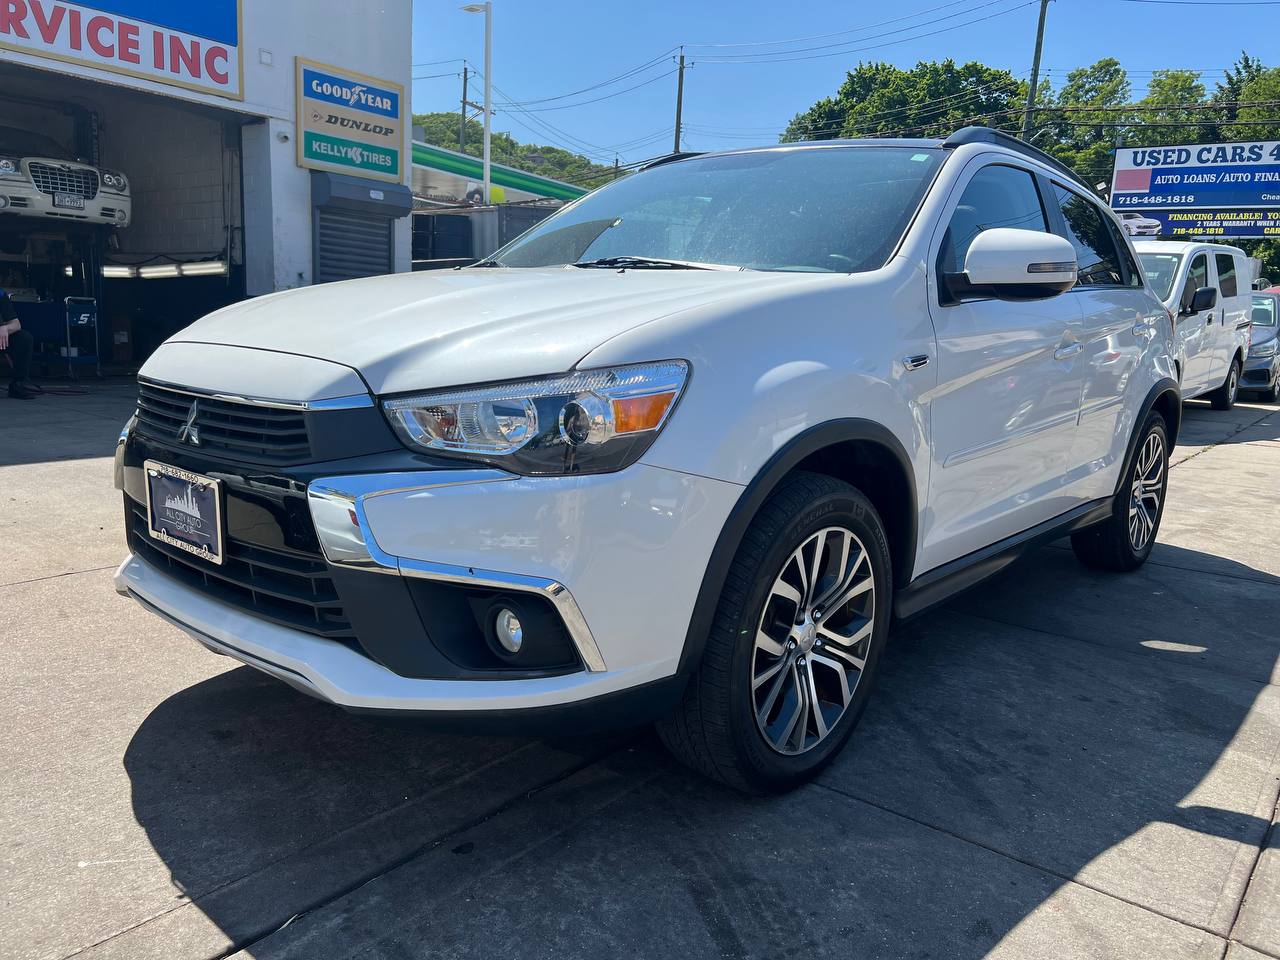 Used Car - 2016 Mitsubishi Outlander Sport for Sale in Staten Island, NY